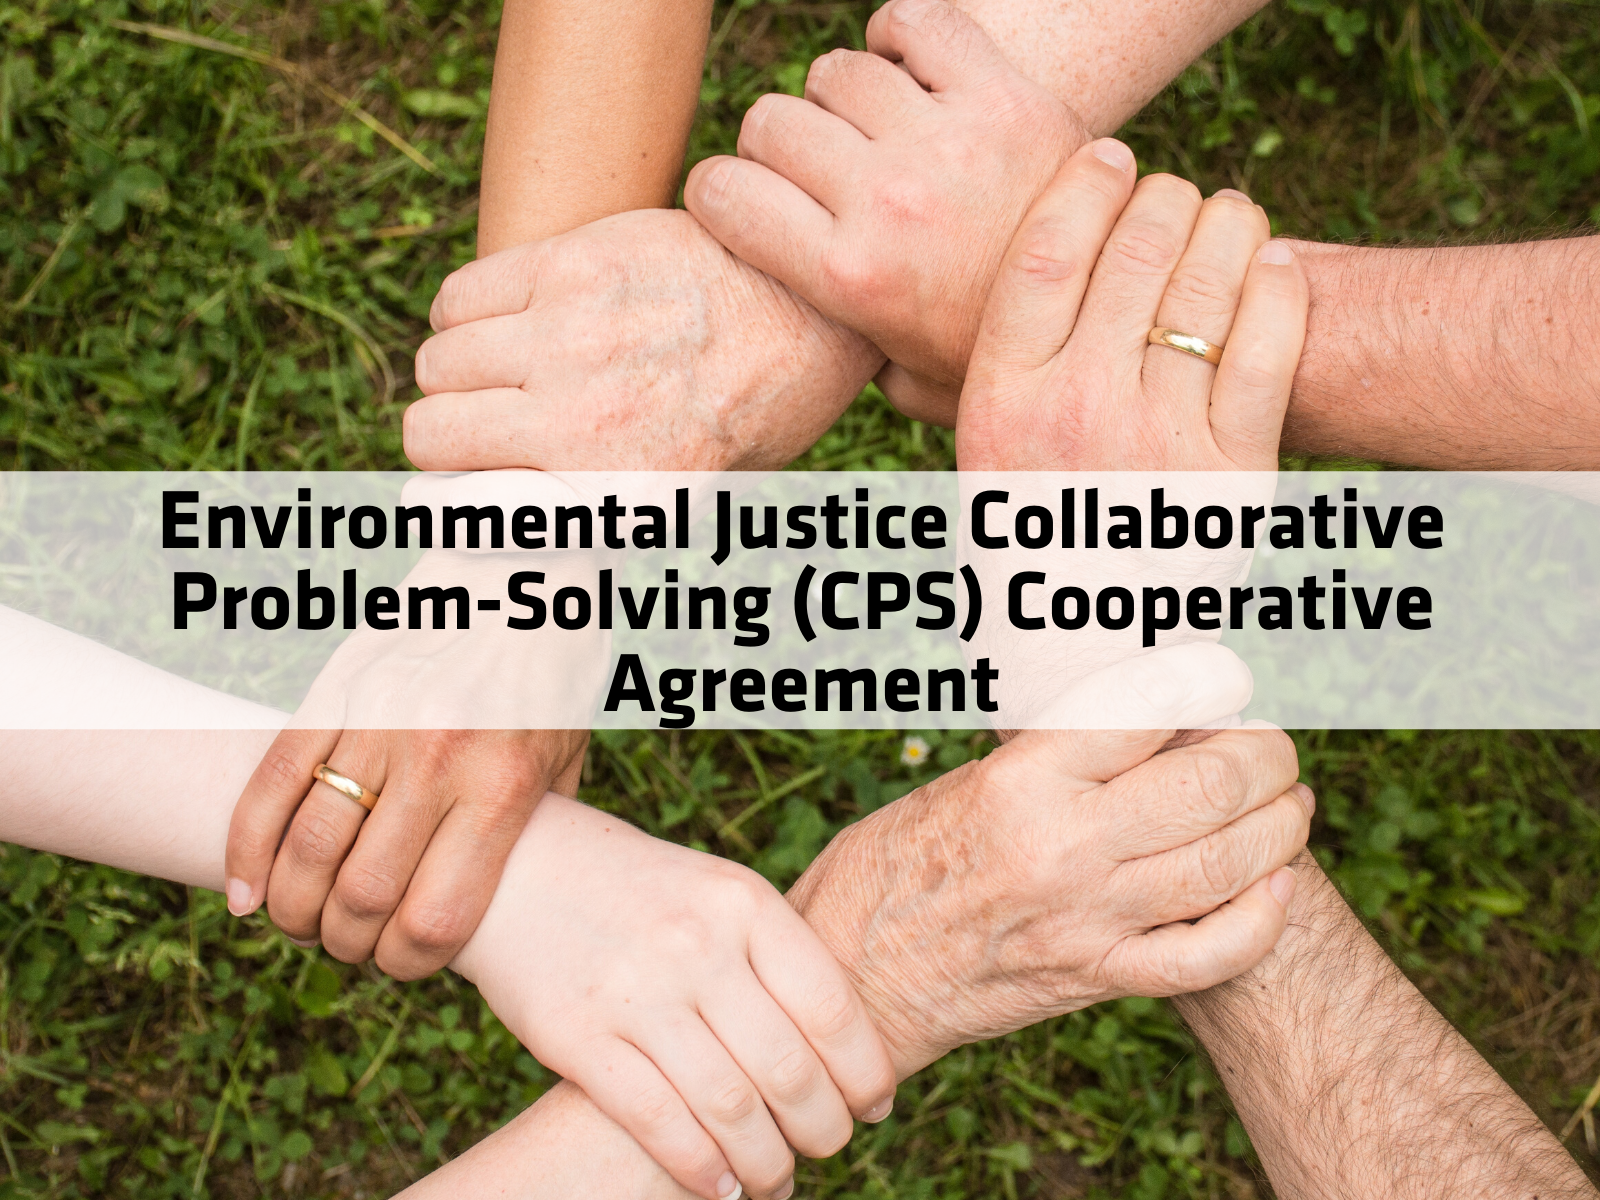 Environmental Justice Collaborative Problem-Solving (CPS) Cooperative Agreement